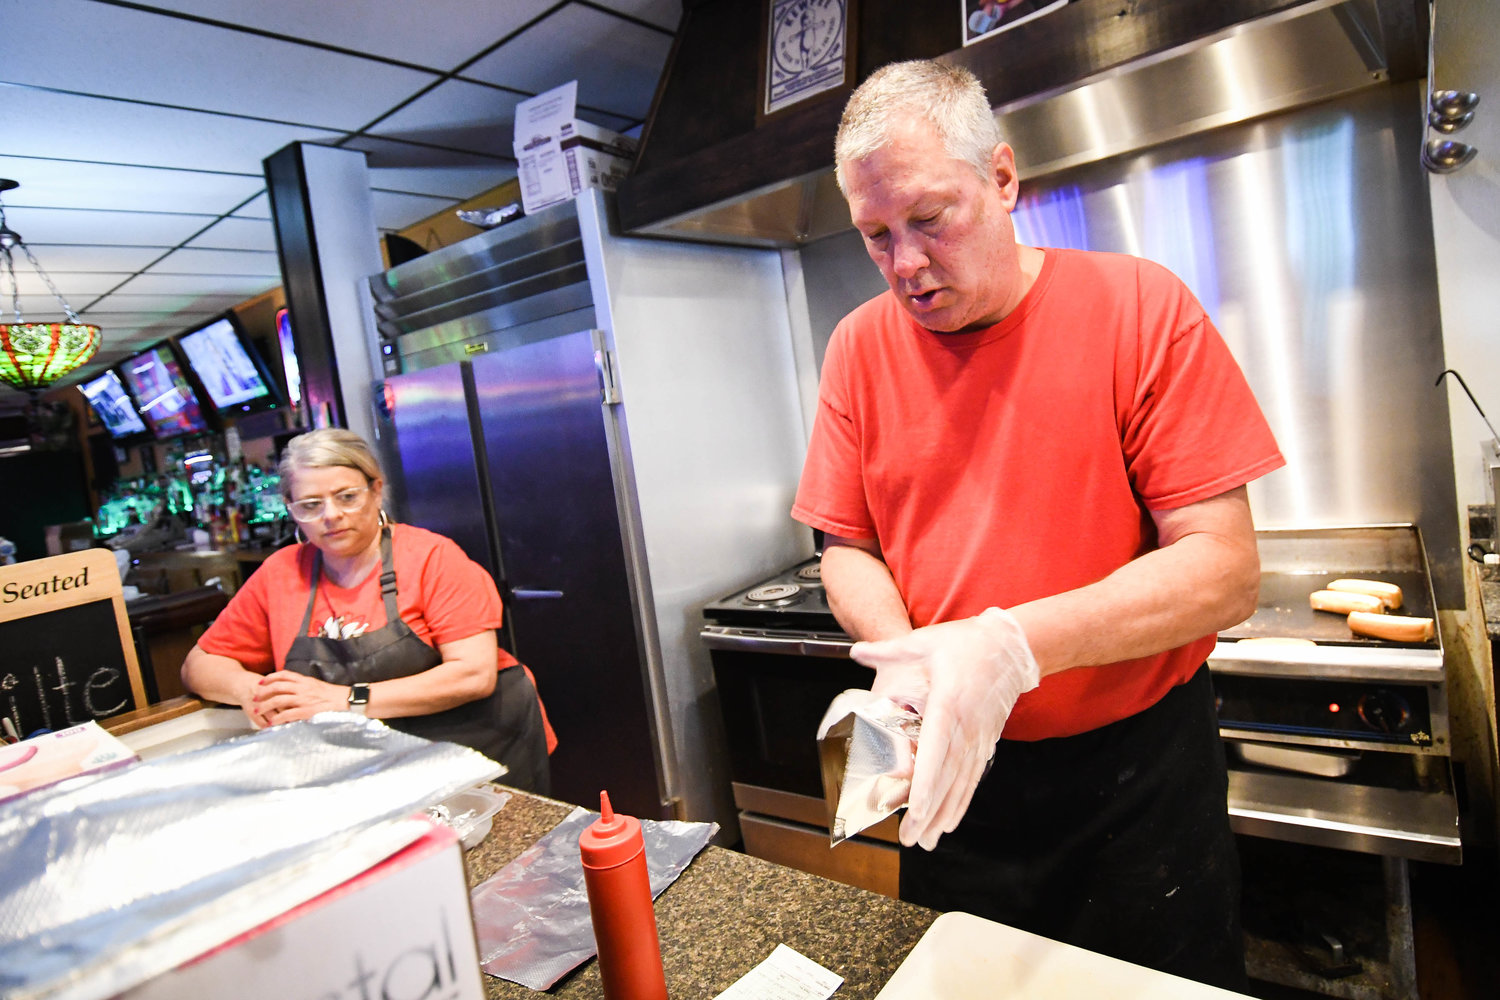 Michael Griffin works on to-go orders in the kitchen at his bar, Griffin's Pub, in Utica. “If you come into this place, hopefully, you leave with a great experience. Most people will go out of their way to talk to you,” he said. “It’s a very friendly place.”